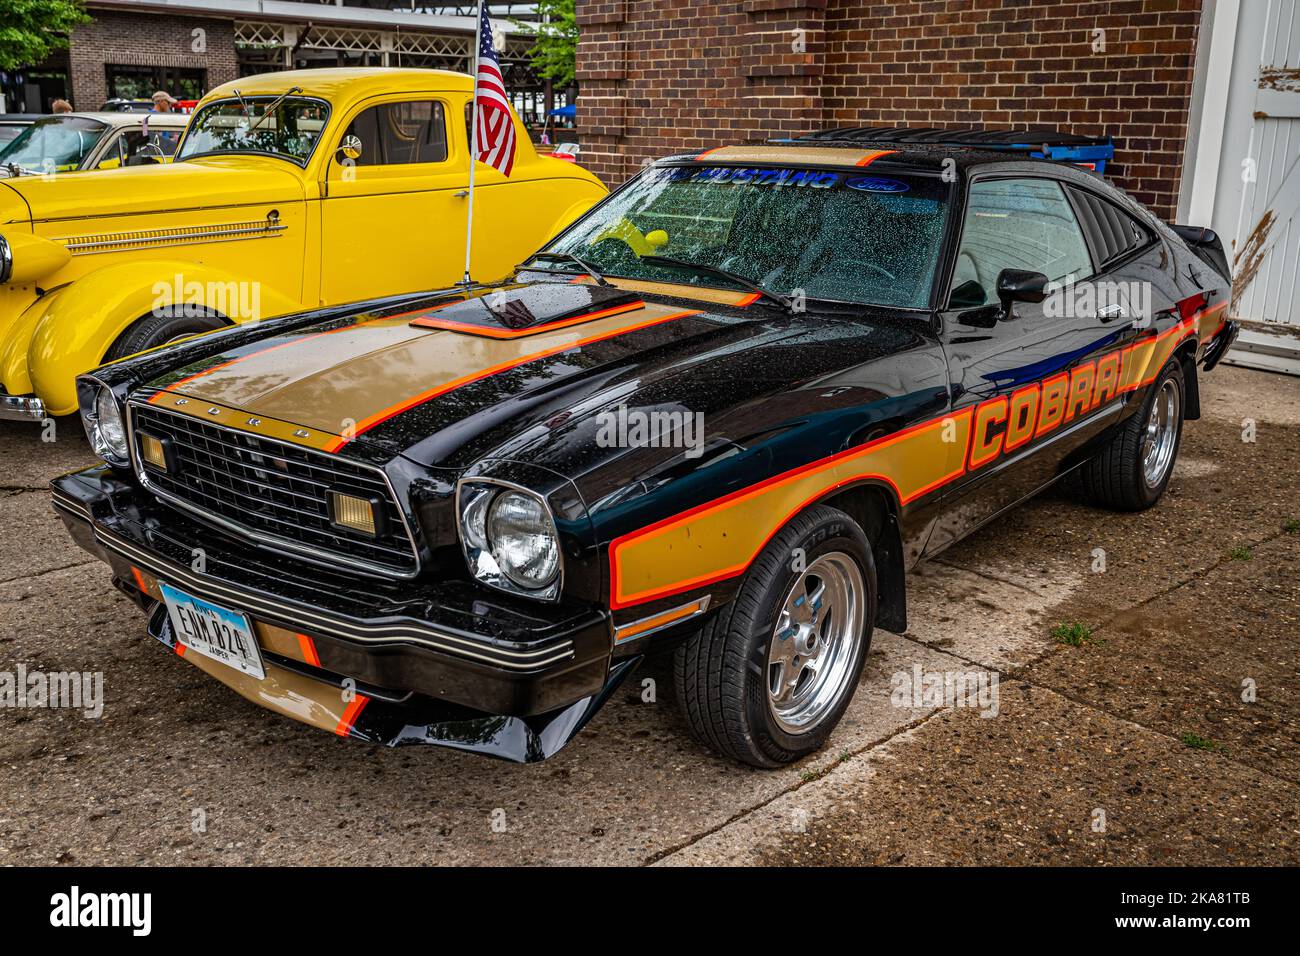 Des Moines, IA - July 01, 2022: High perspective front corner view of a 1978 Ford Mustang Cobra II at a local car show. Stock Photo